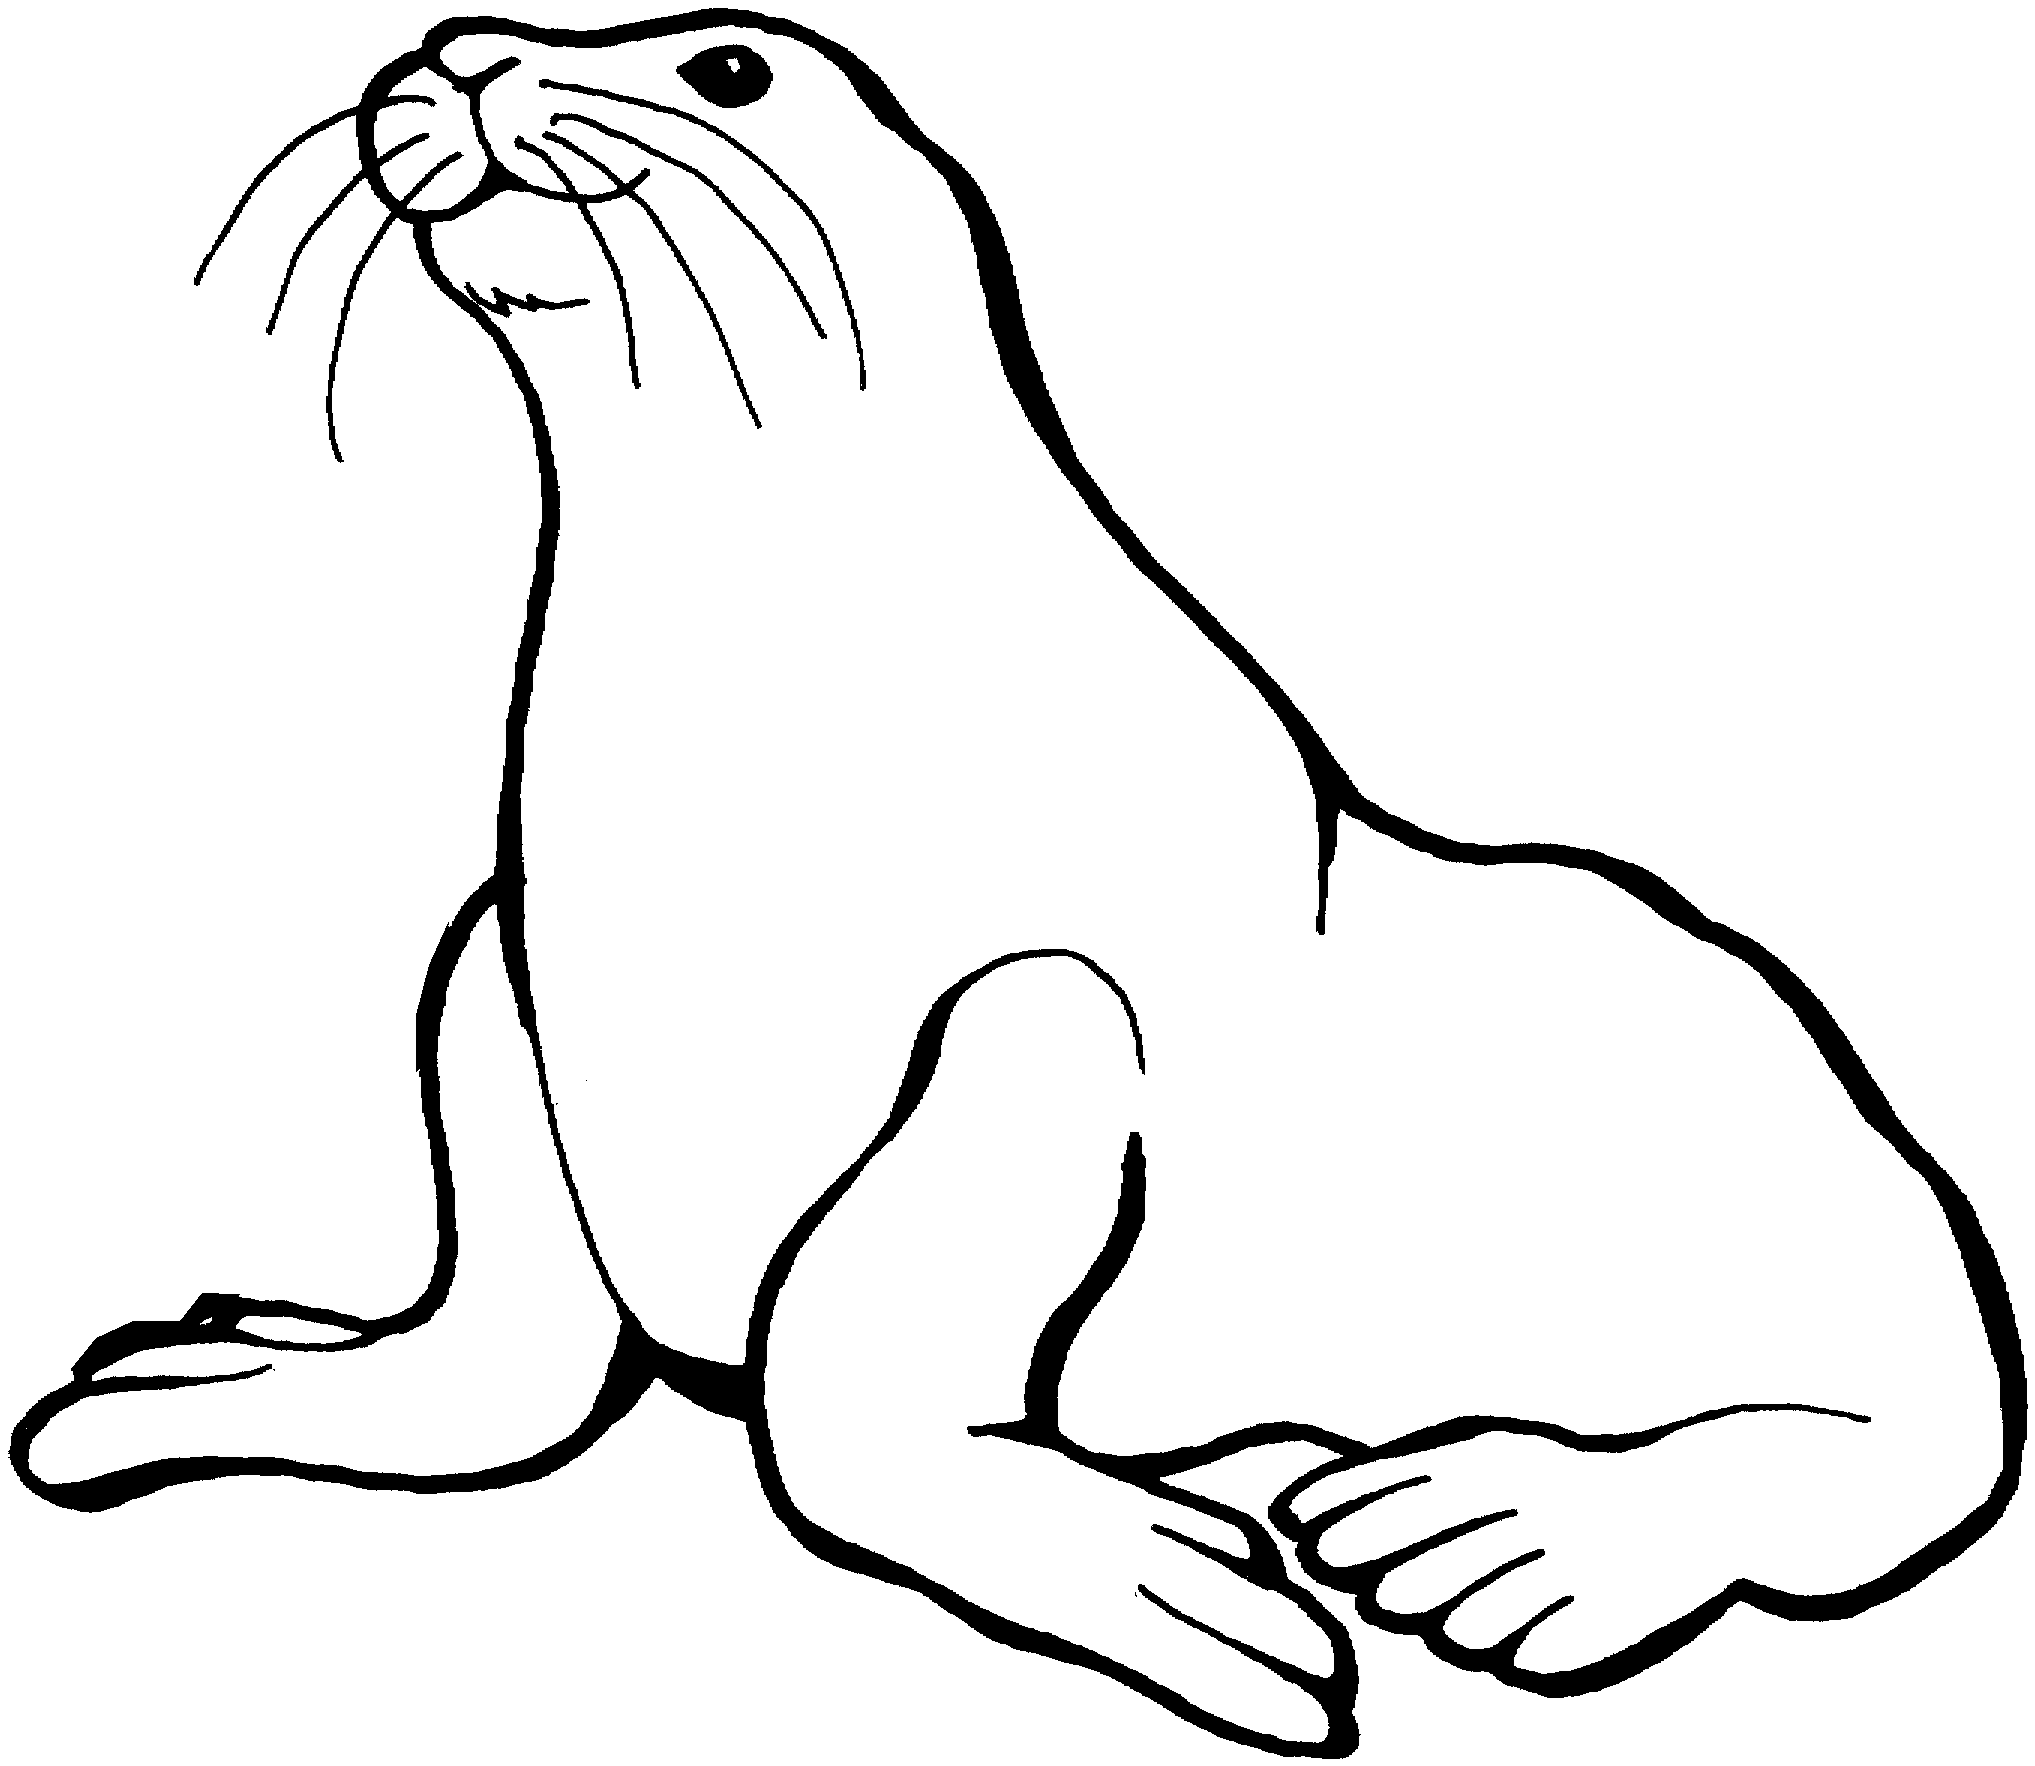 Elephant Seal coloring #4, Download drawings